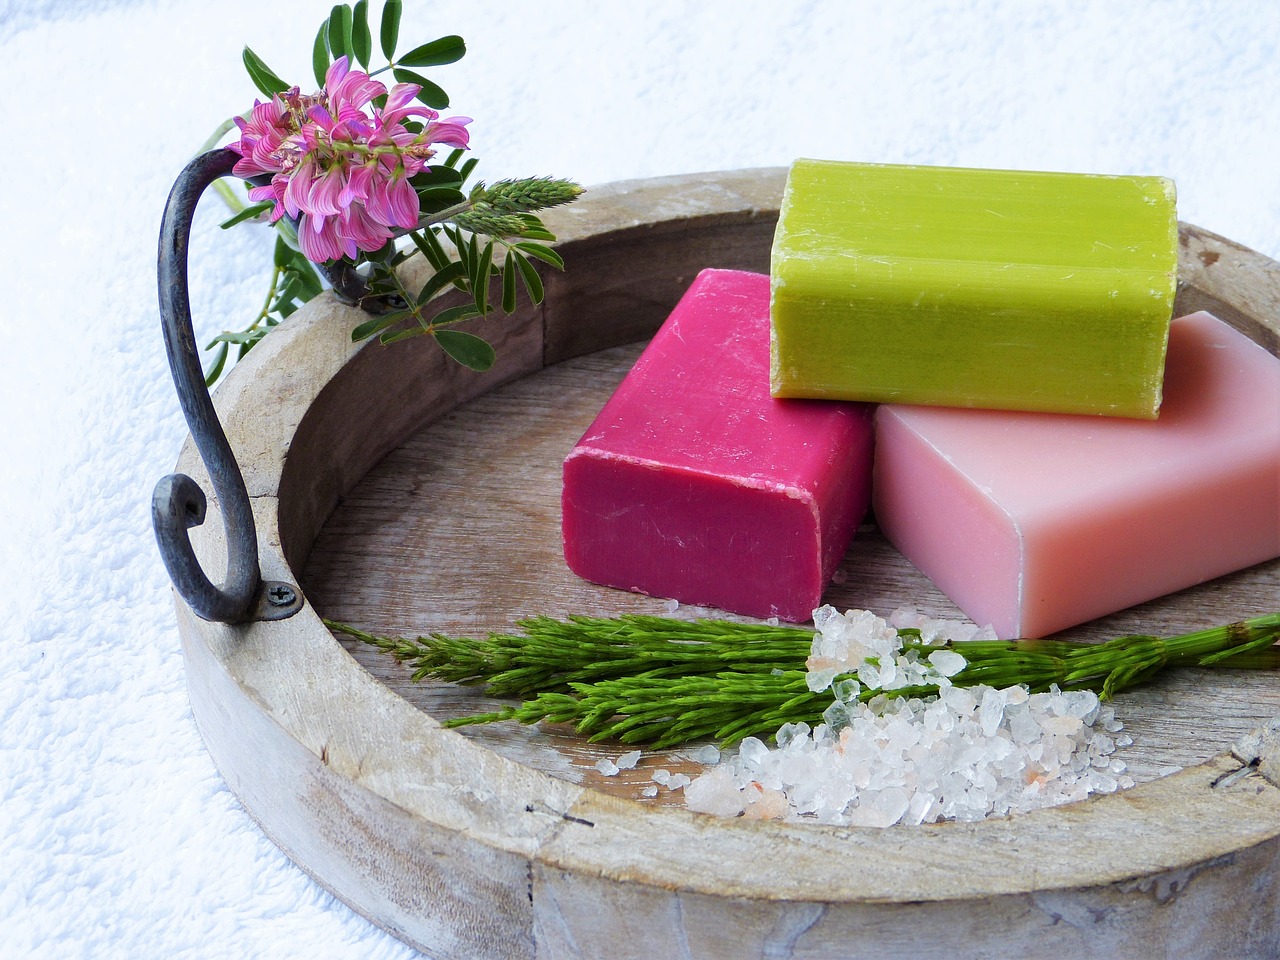 How to Add Fragrances in Soap Making Recipes